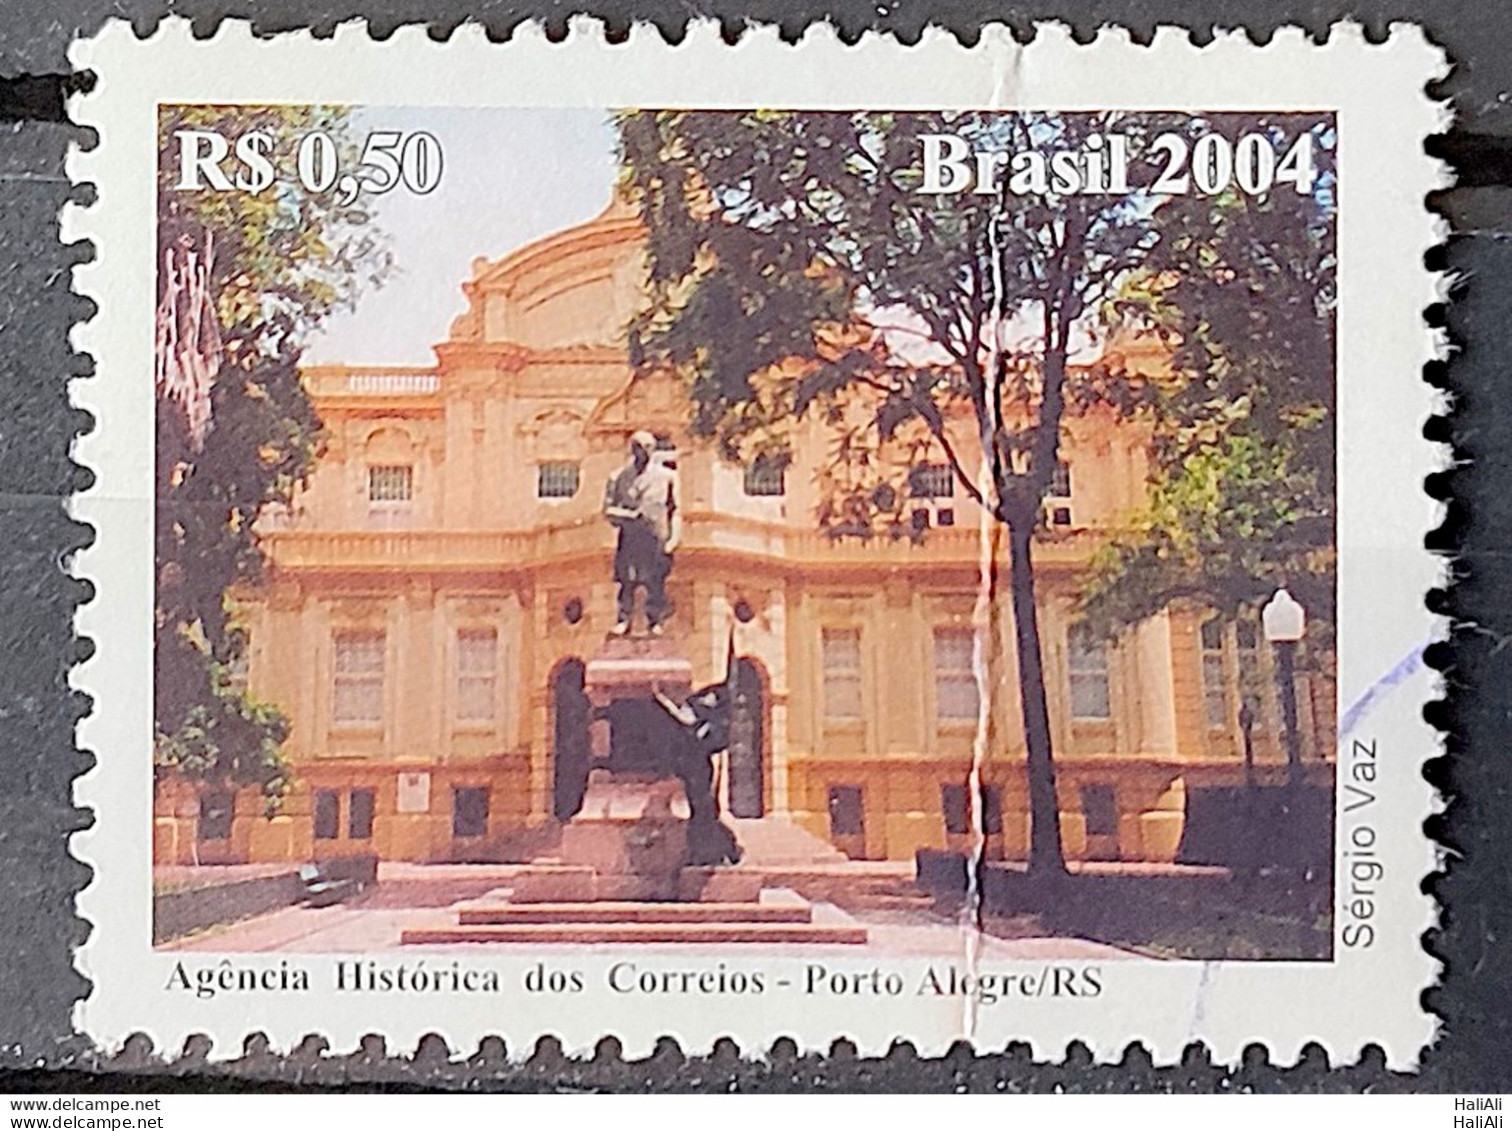 C 2600 Brazil Stamp Historic Agency Of Post Office Porto Alegre Postal Service 2004 Circulated 2 - Used Stamps